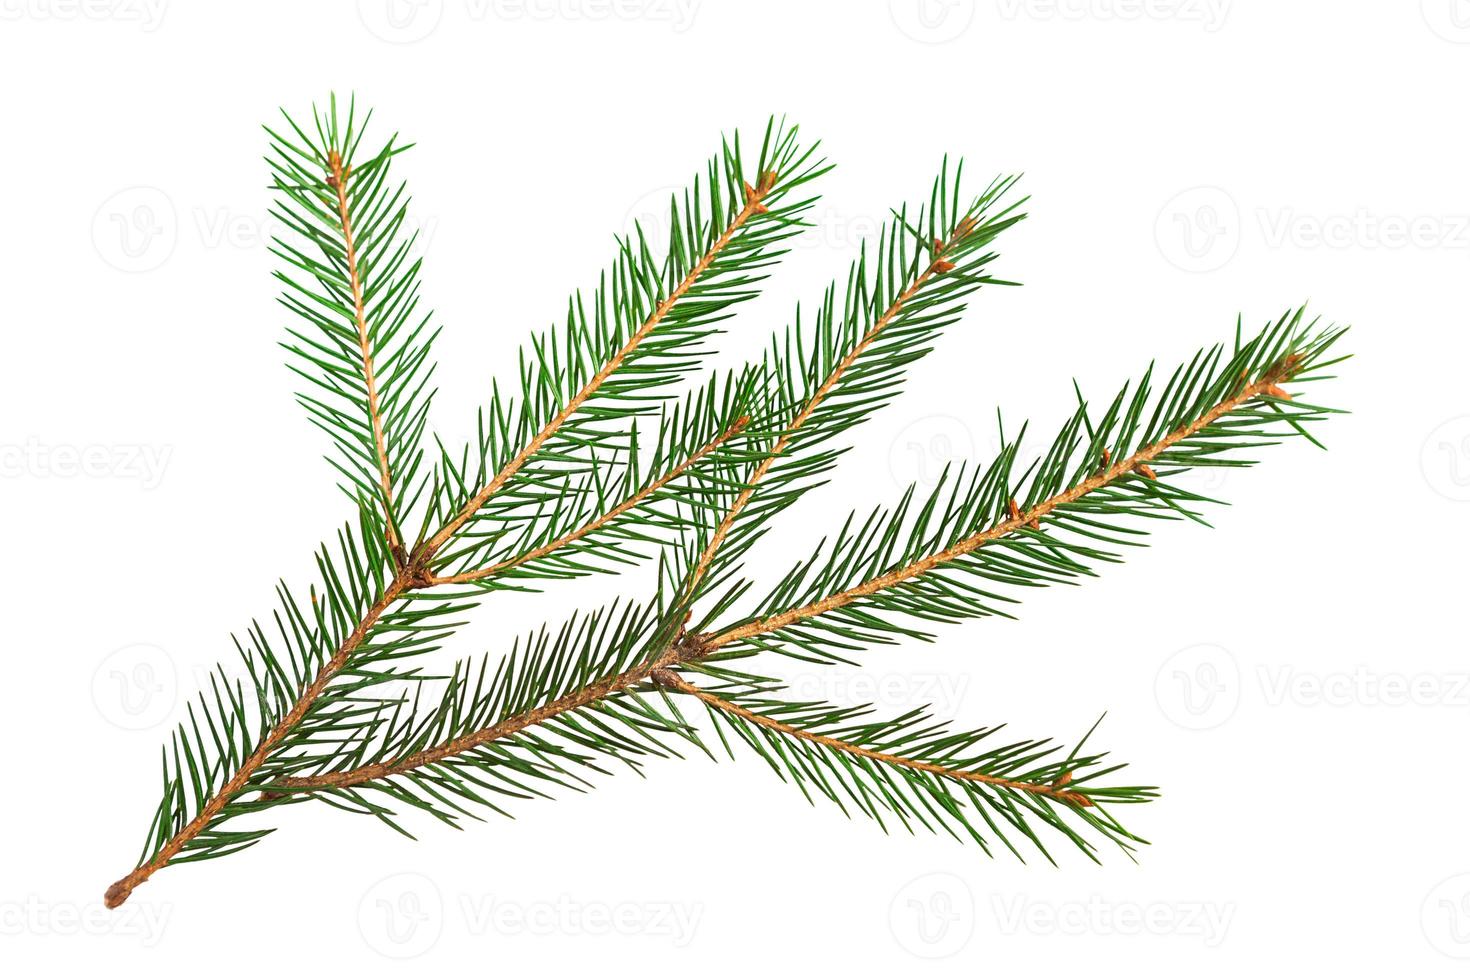 Green spruce branch with short needles close-up on a white background, isolate. Christmas tree, decoration. New year, Christmas. Evergreen coniferous tree, common spruce photo